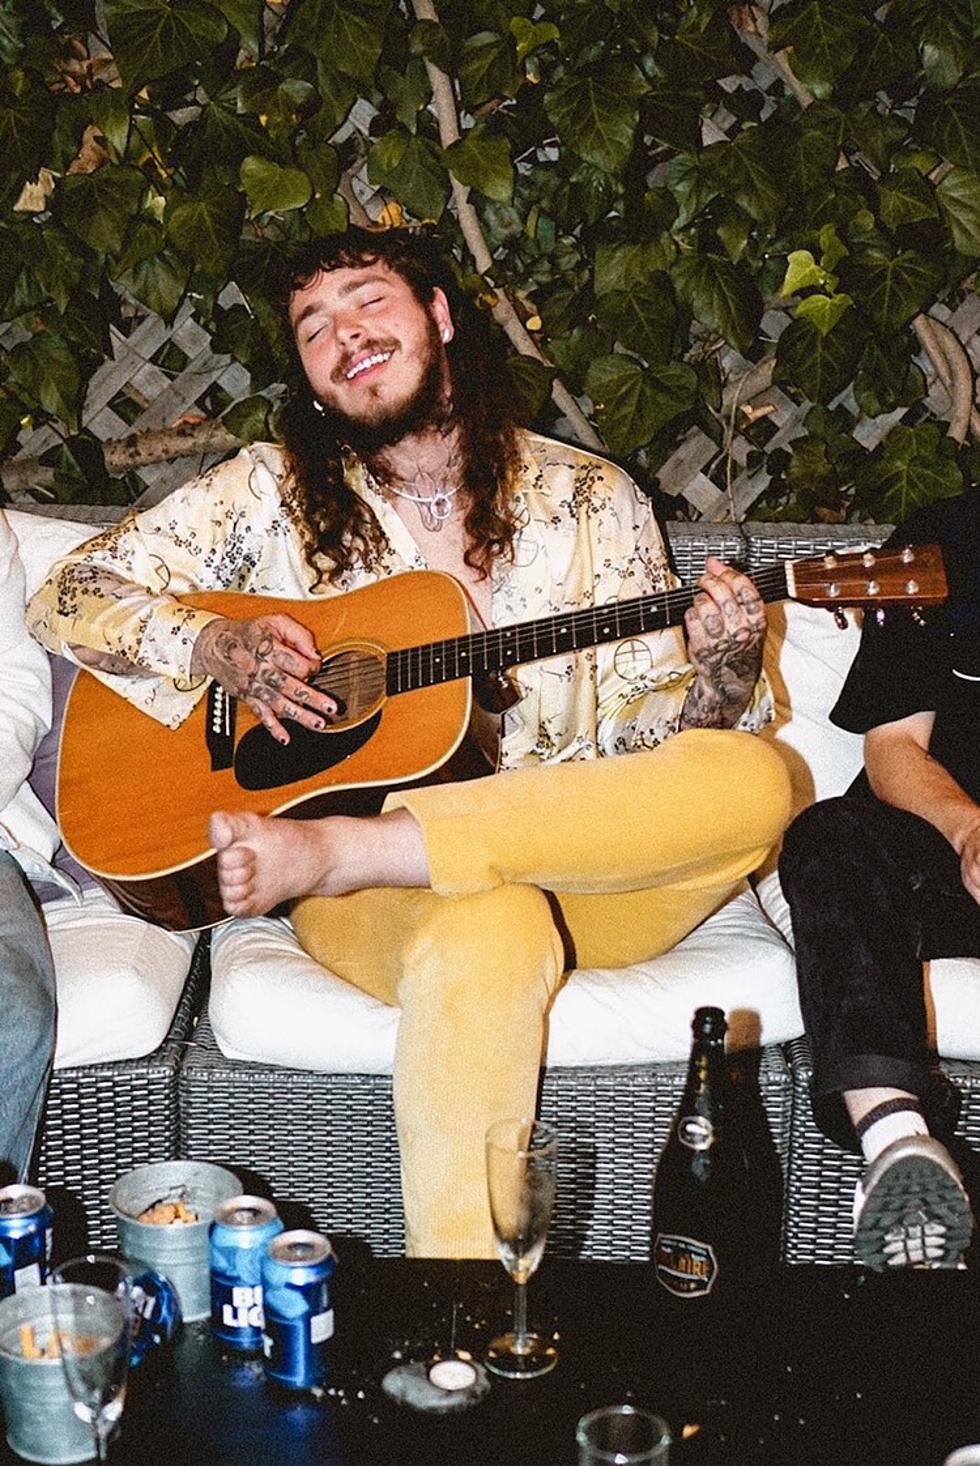 Watch Post Malone Cover Nirvana’s “All Apologies”